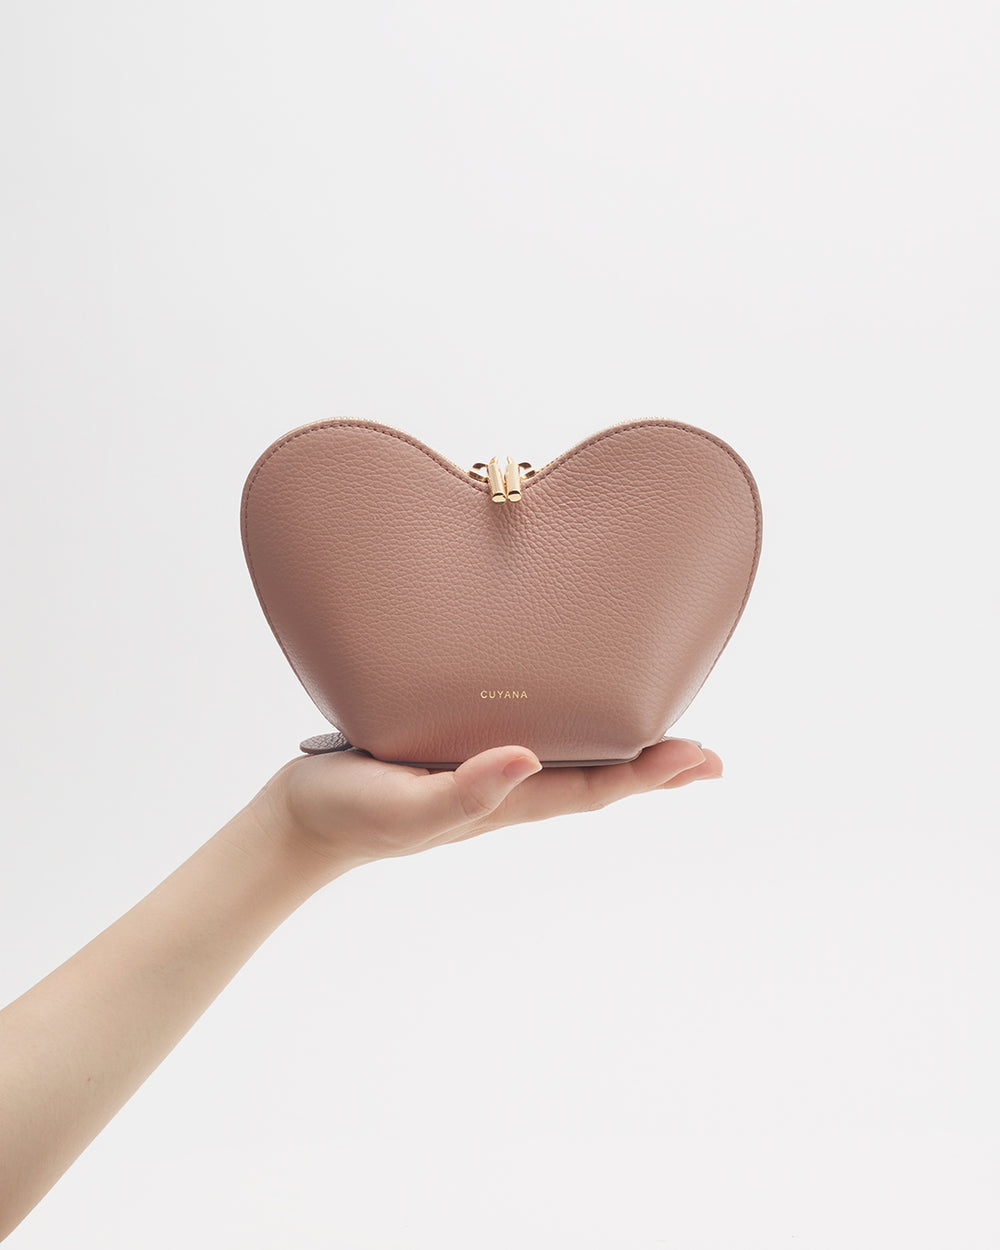 Hand holding a heart-shaped purse against a plain background.